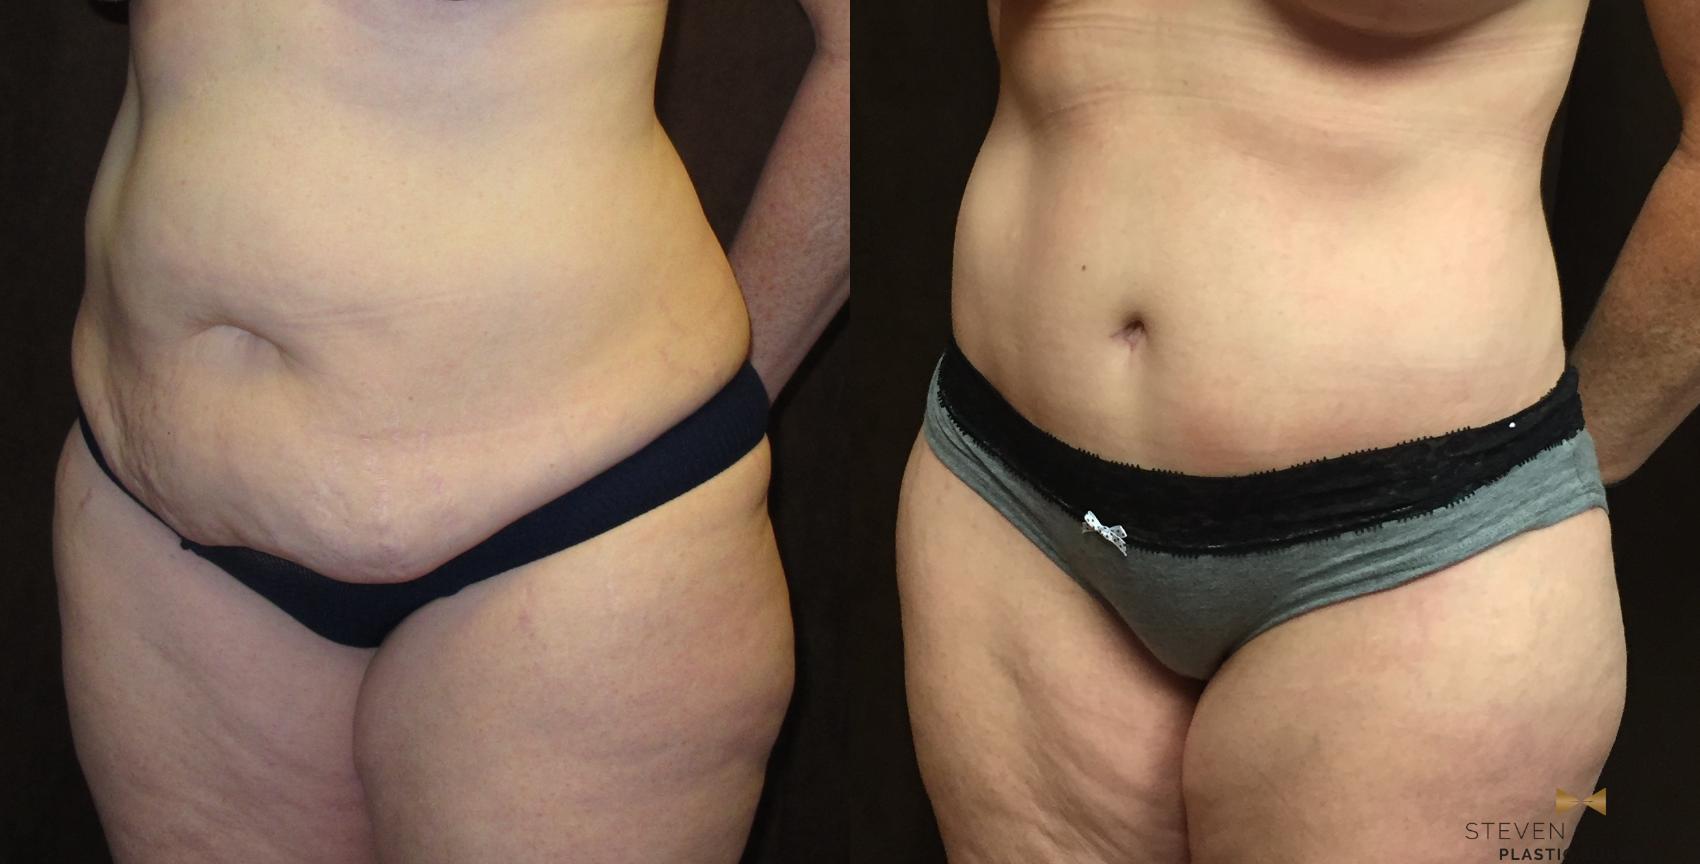 At 46 This Mother Of 2 Looks Great After Tummy Tuck And Liposuction Surgery...